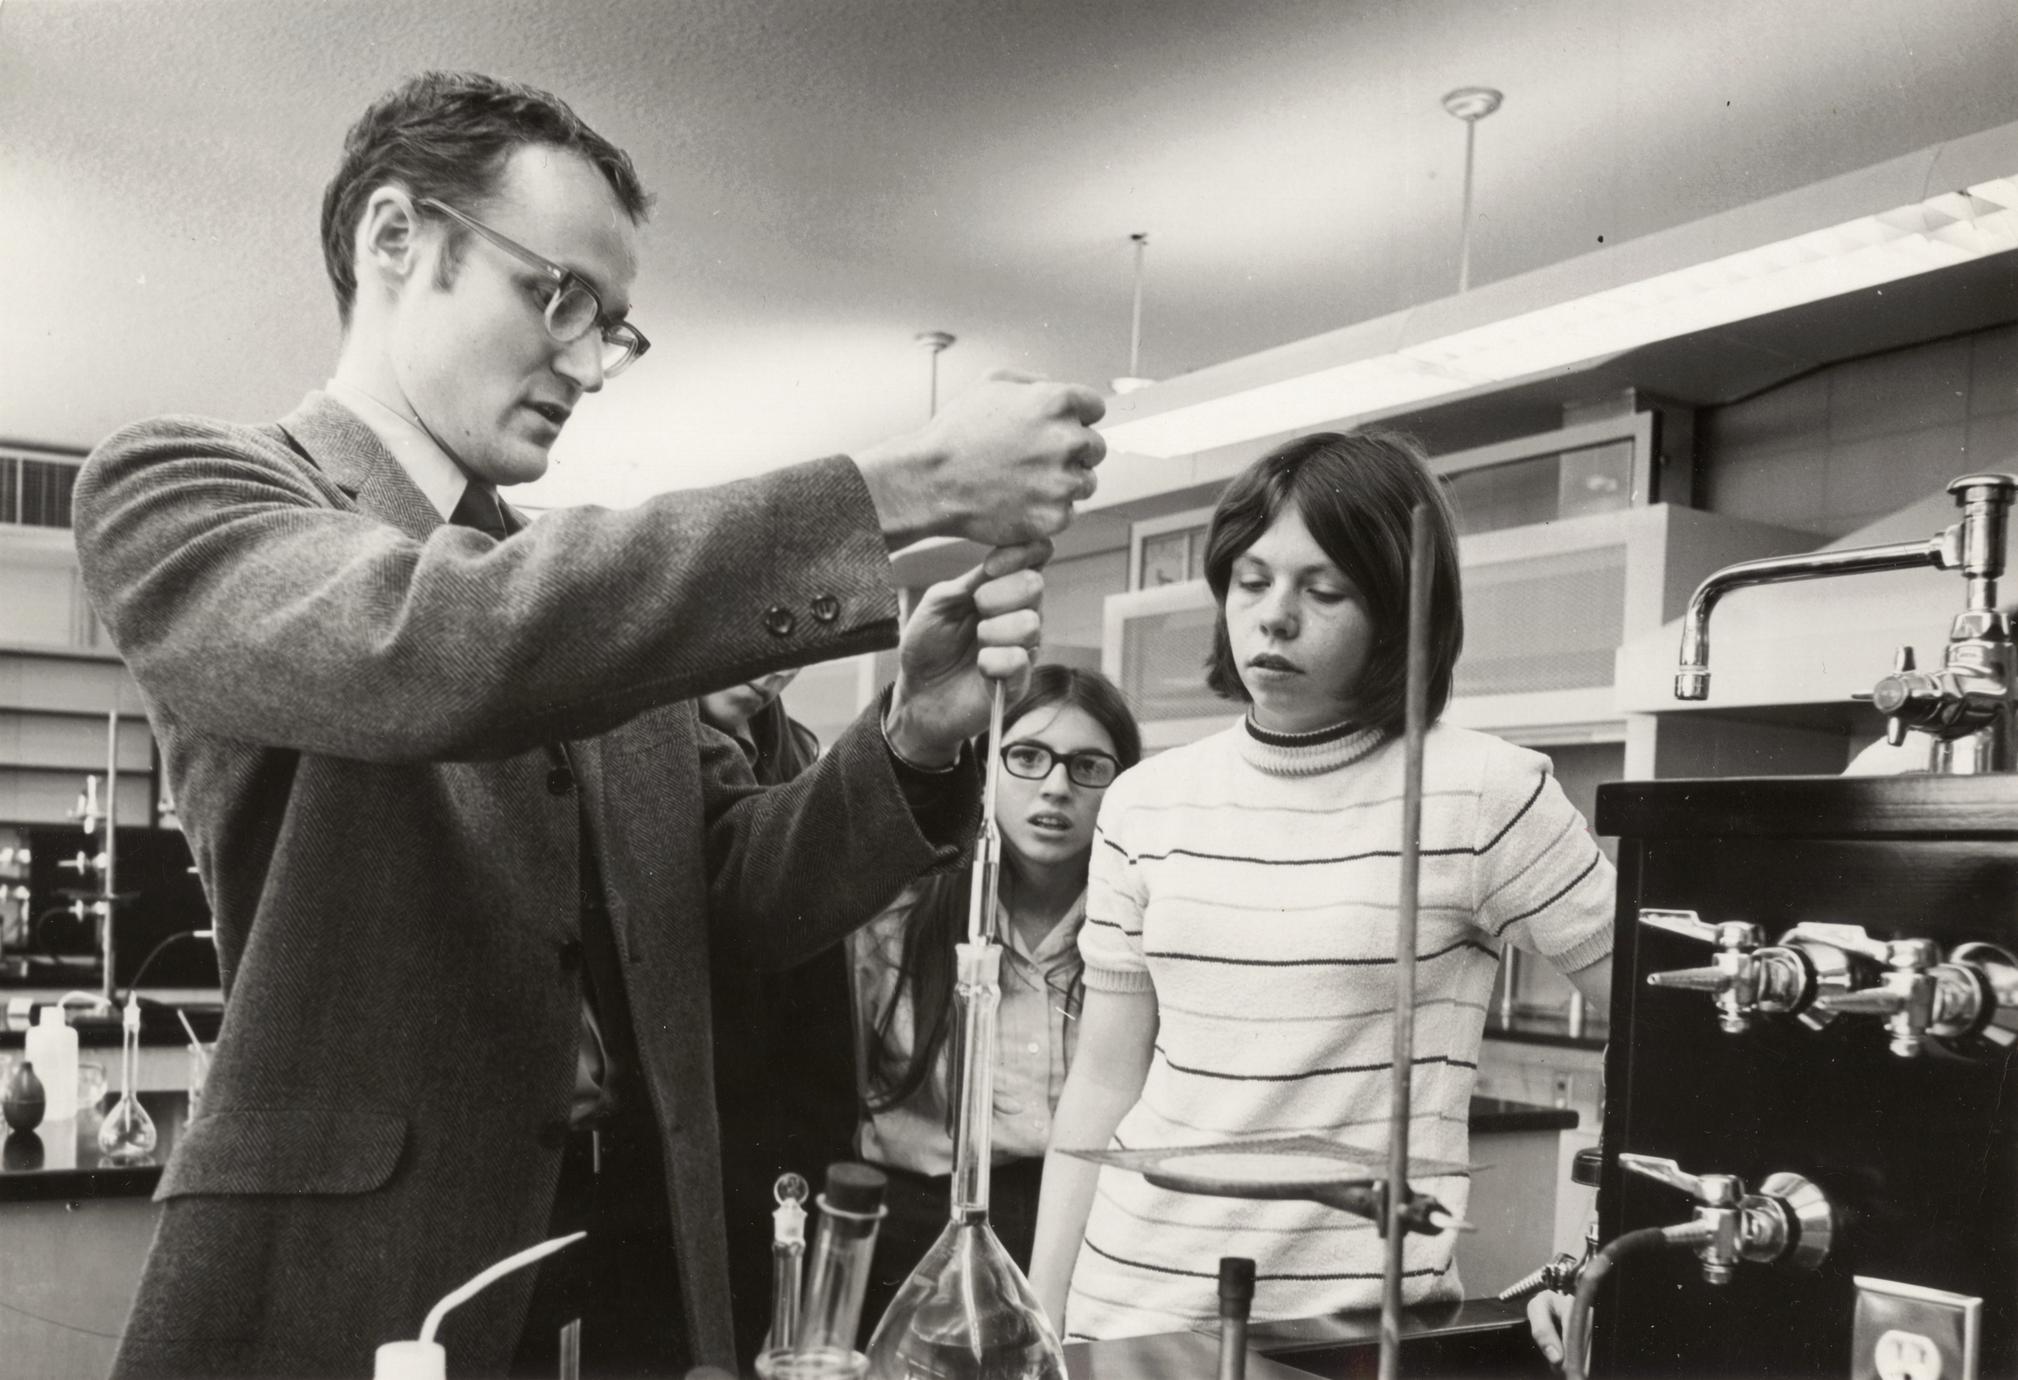 H.S. Science Workshop, University of Wisconsin--Marshfield/Wood County, March 1971